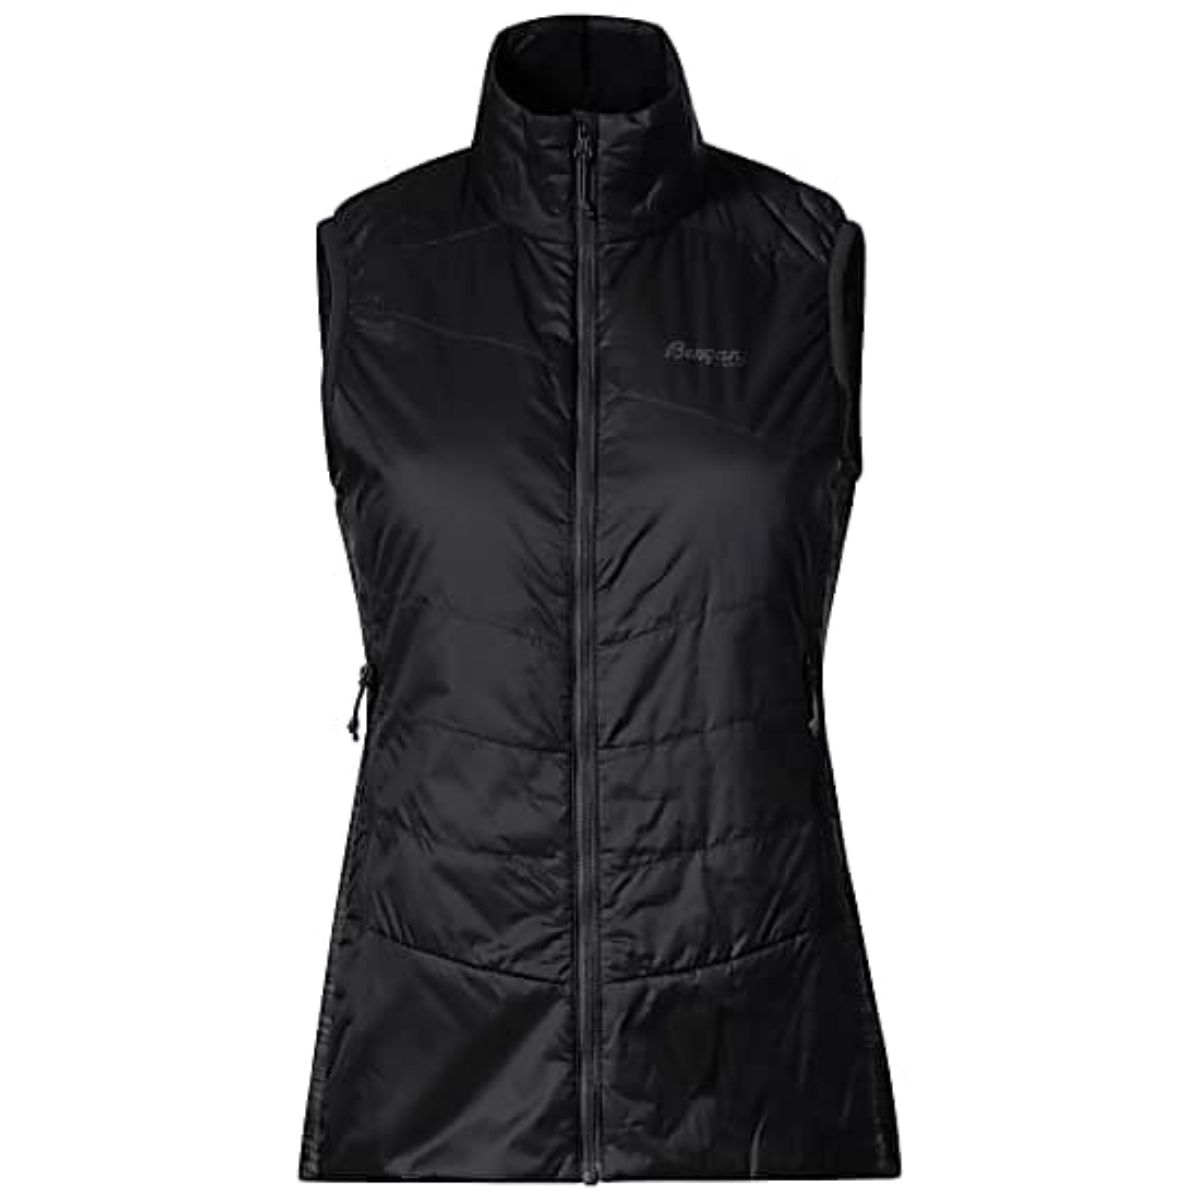 bergans-of-norway-rabot-insulated-hybrid-vest-wo-blacksolid-charcoal